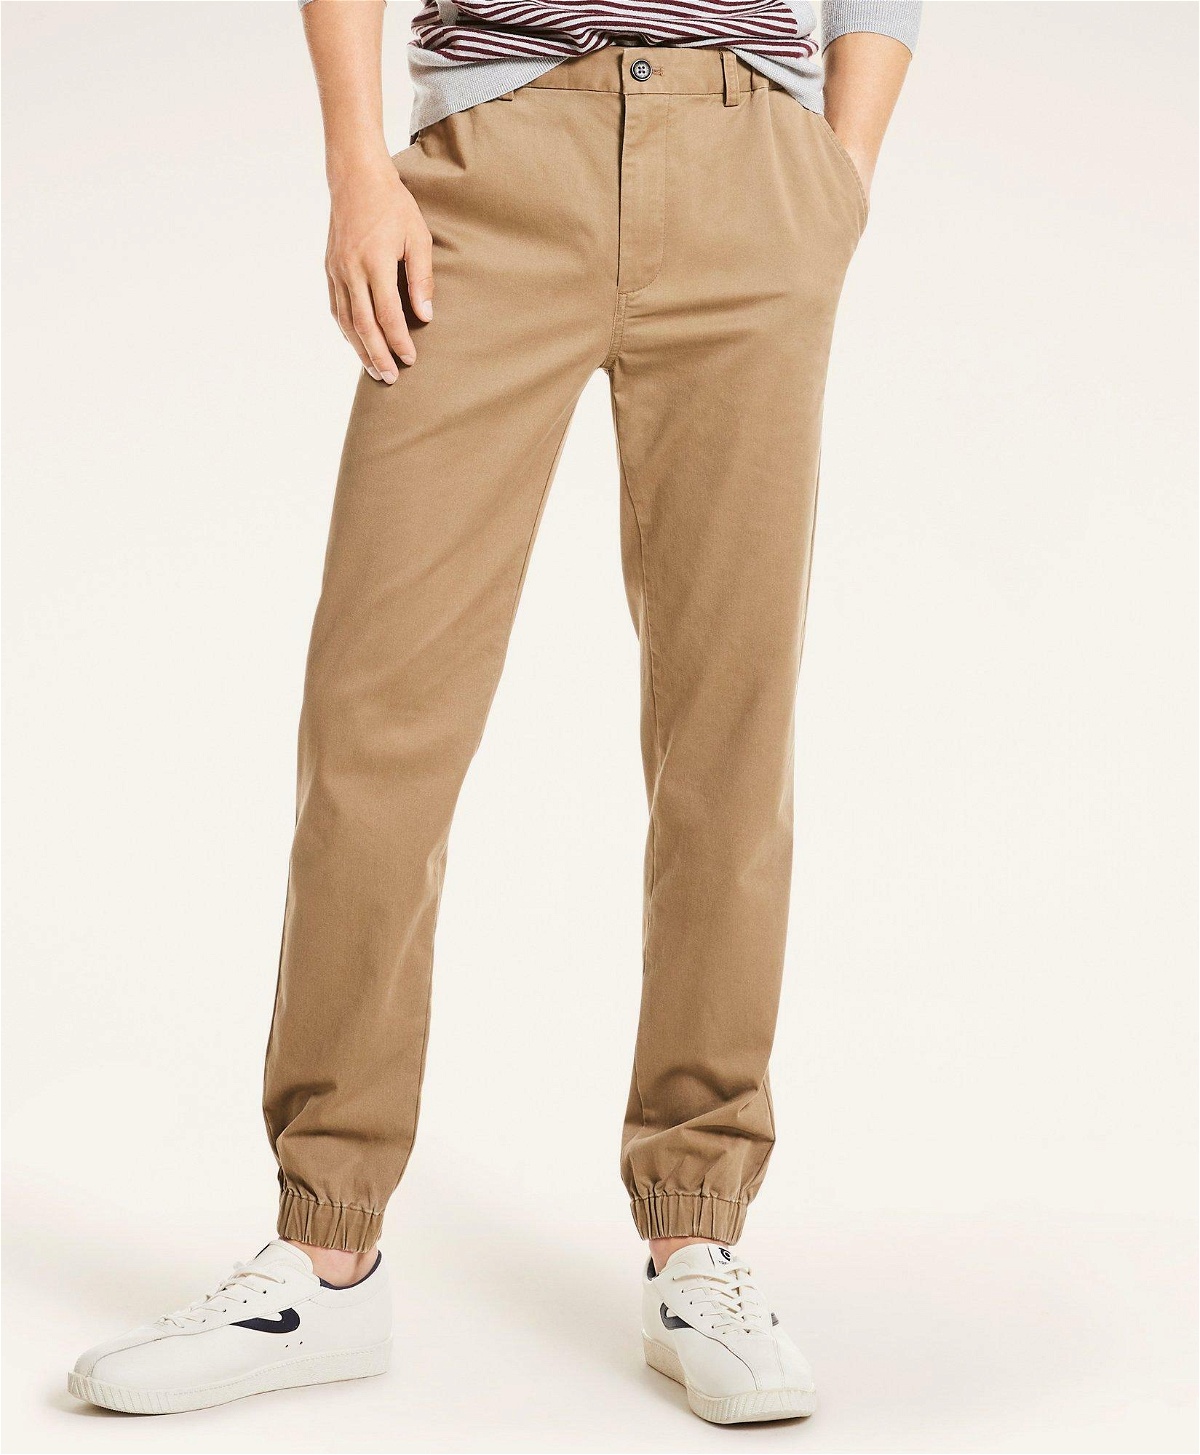 Brooks Brothers Men's Stretch Cotton Twill Jogger Pants